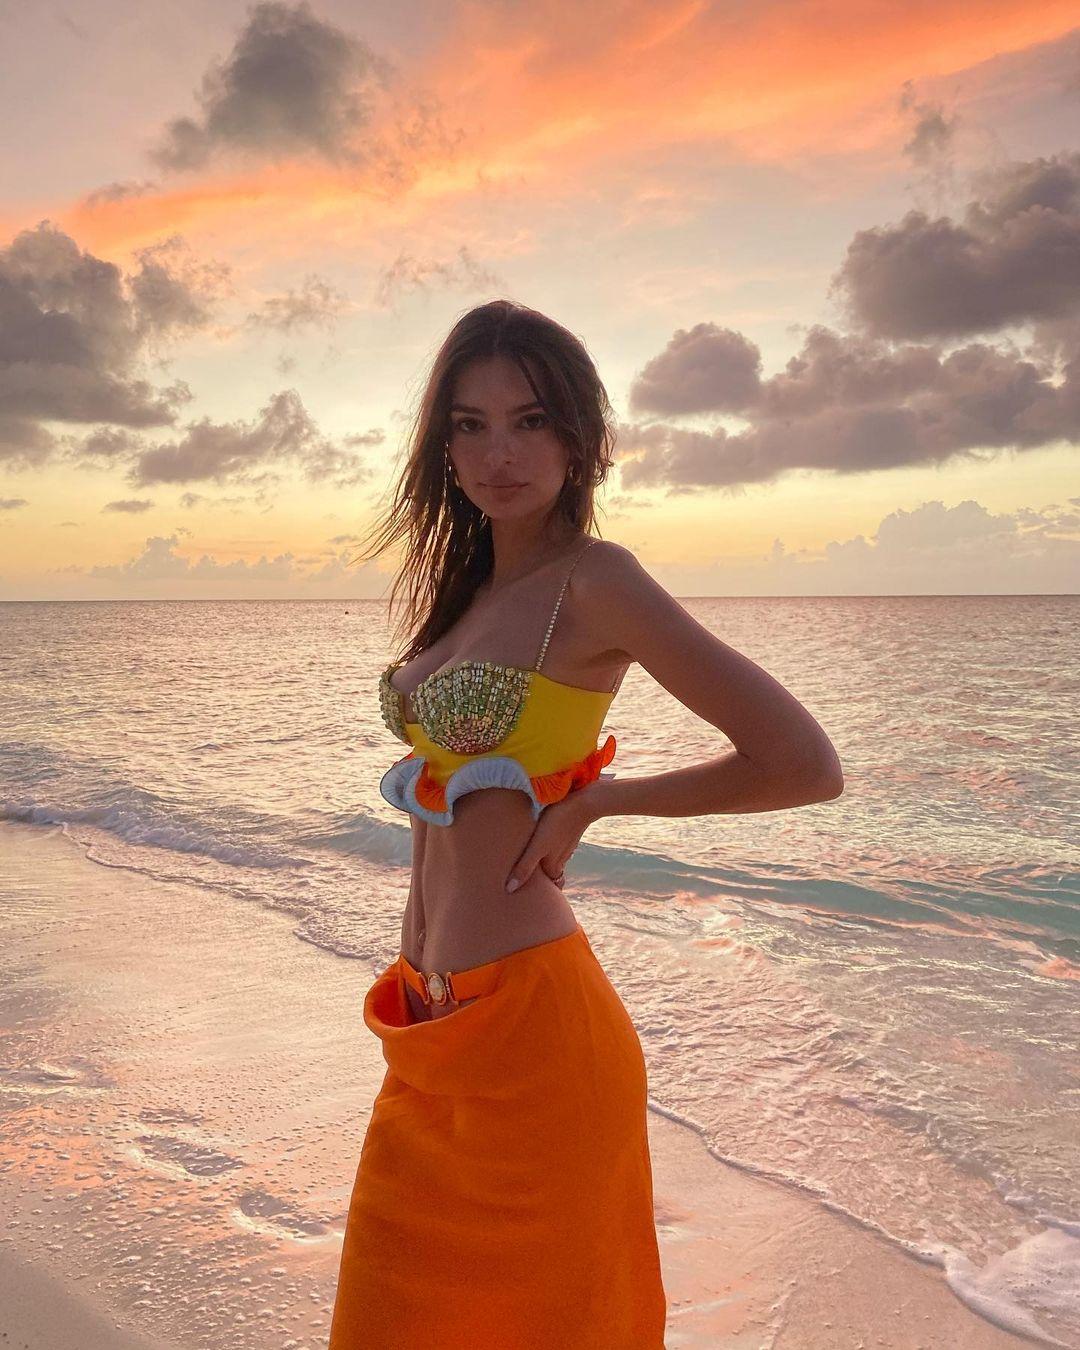 Emily Ratajkowski looks incredible in this photo of her at the beach during sunset.